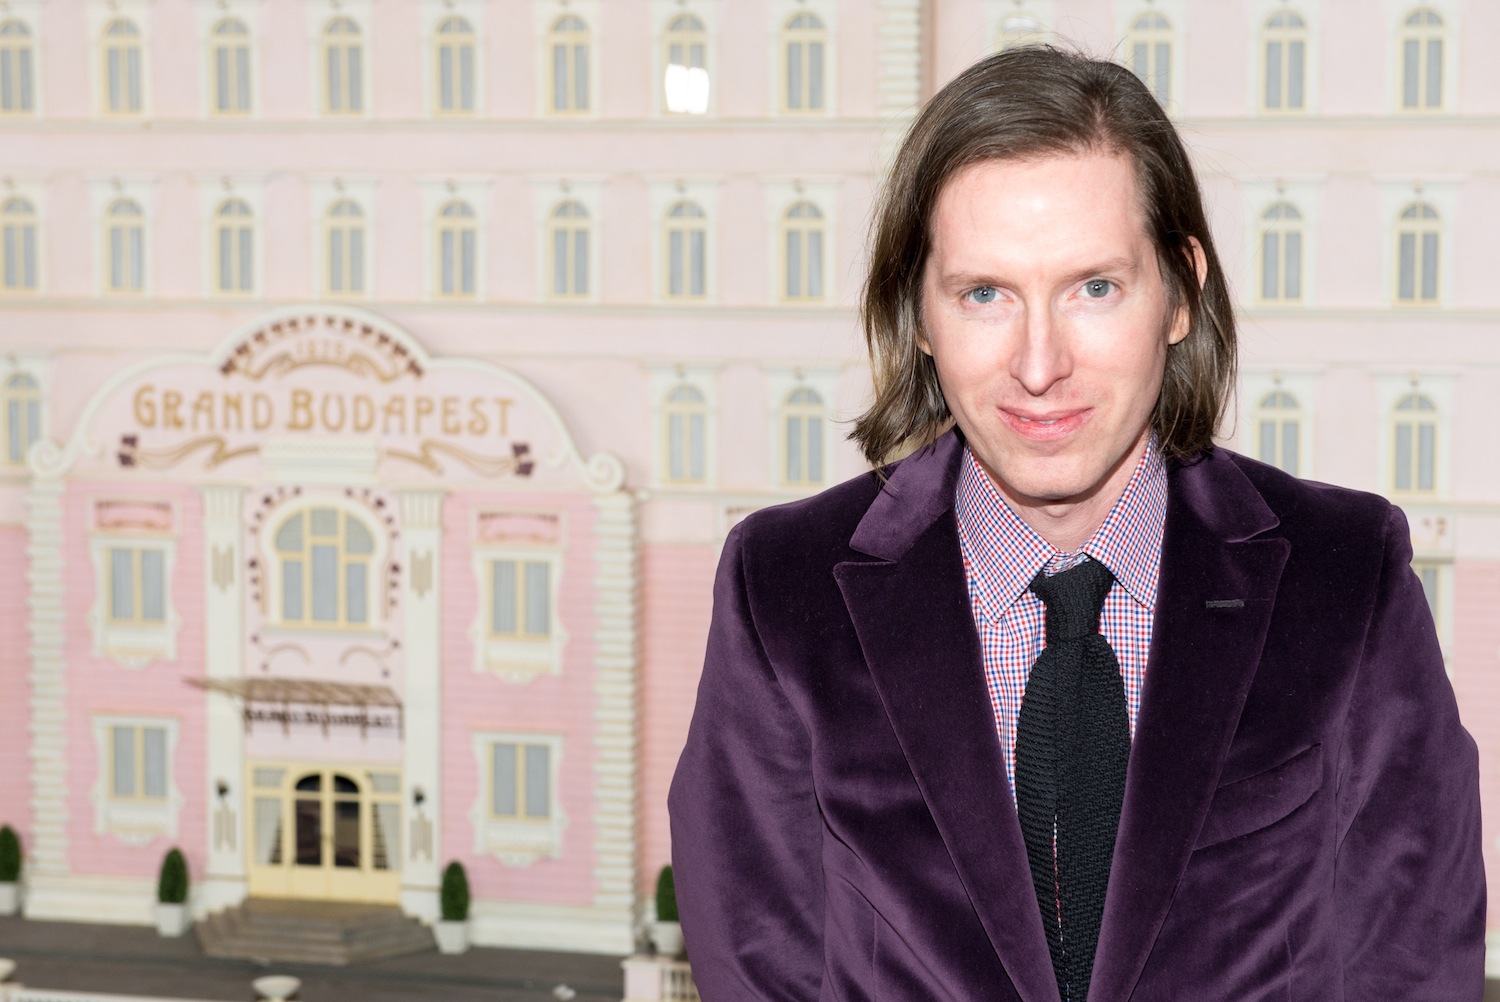 Wes Anderson attends "The Grand Budapest Hotel" premiere at Alice Tully Hall on Feb. 26, 2014 in New York City. (Mike Pont—FilmMagic/Getty Images)